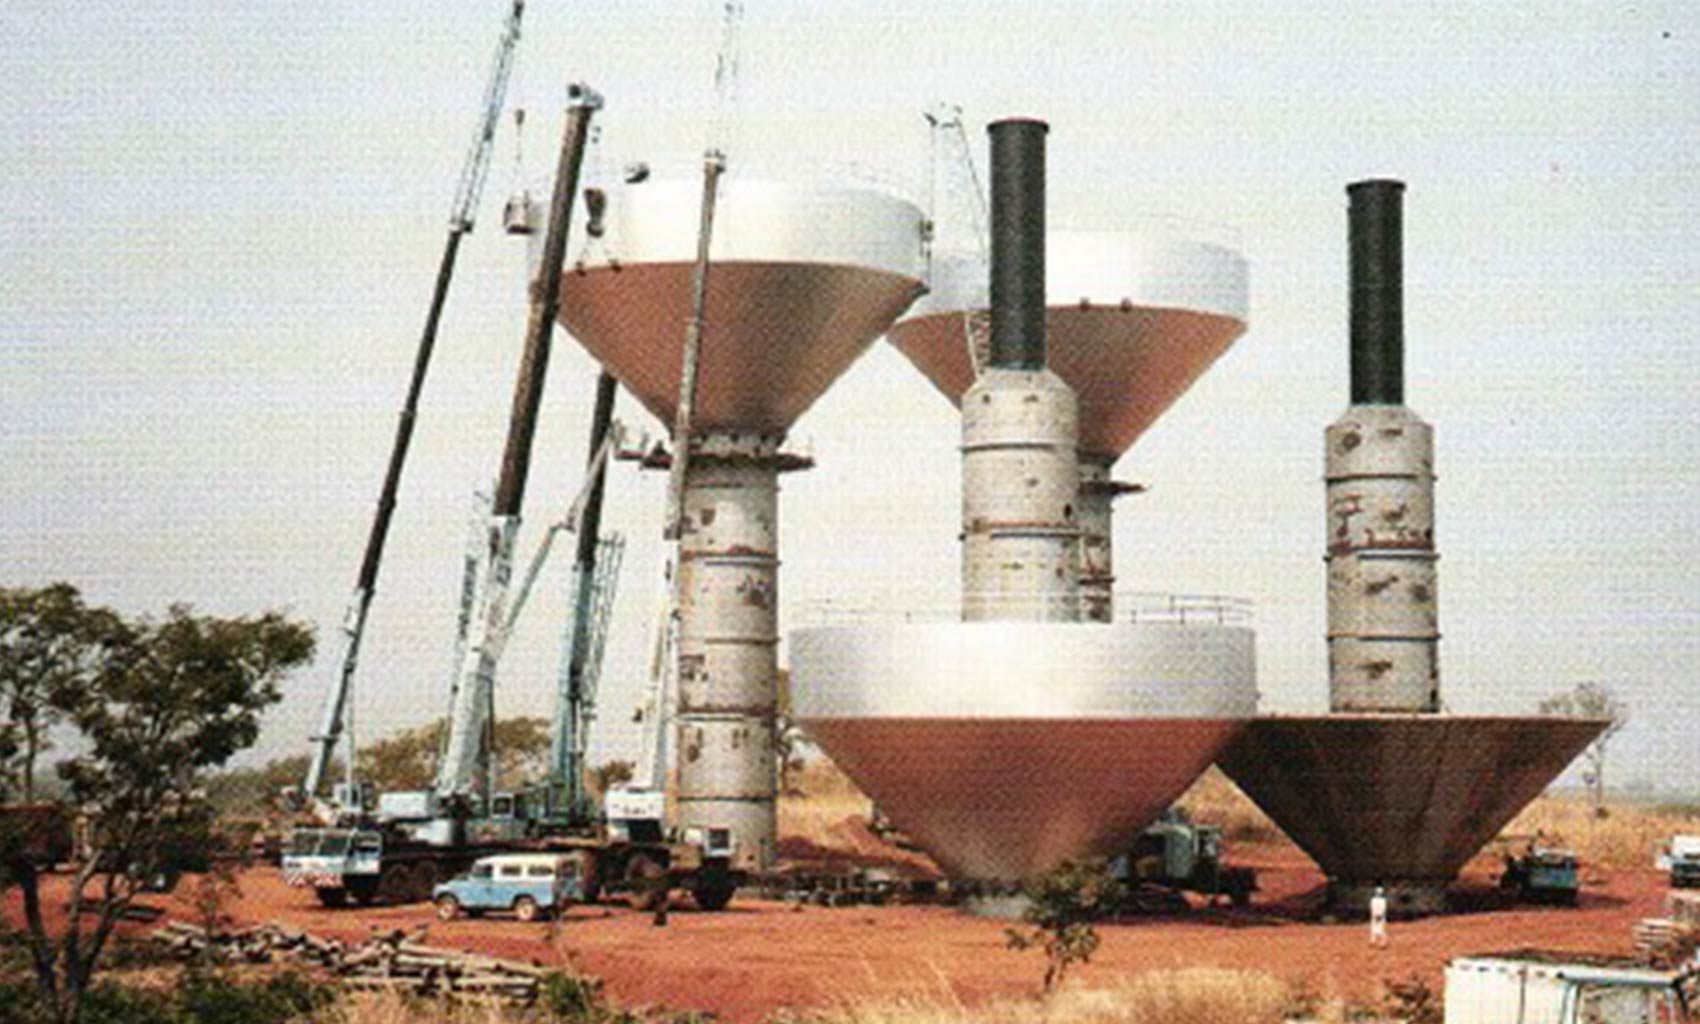 Niger state contract_Tower assembly at Kontagora 1989.jpg